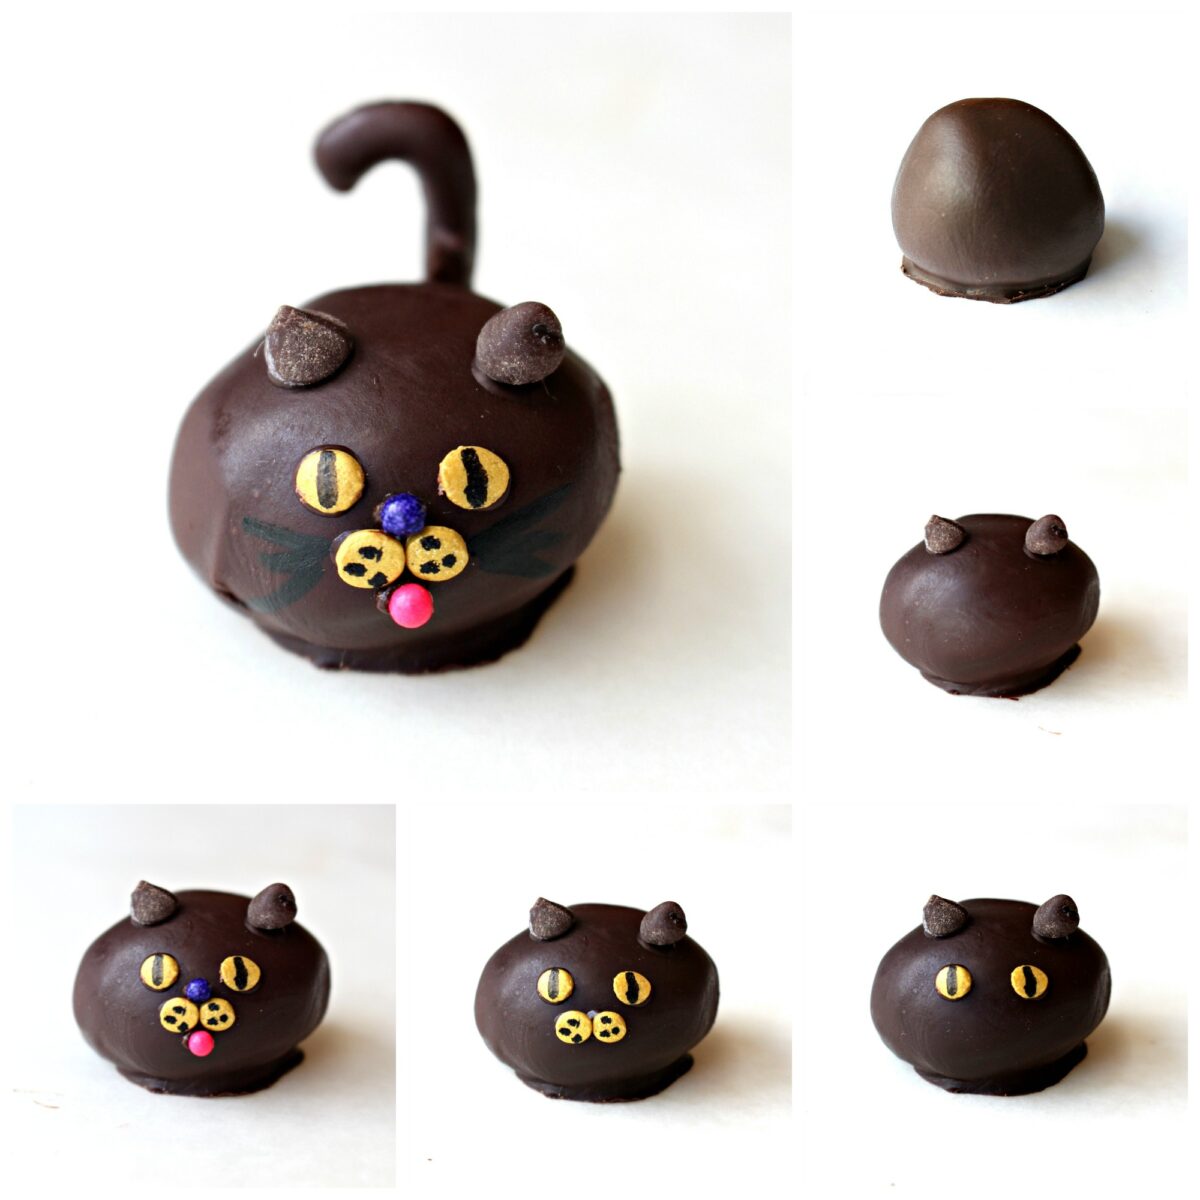  Cat decorating: chocolate covered ball, mini-chip ears, gold disc eyes/whiskers, sprinkle above and below discs.